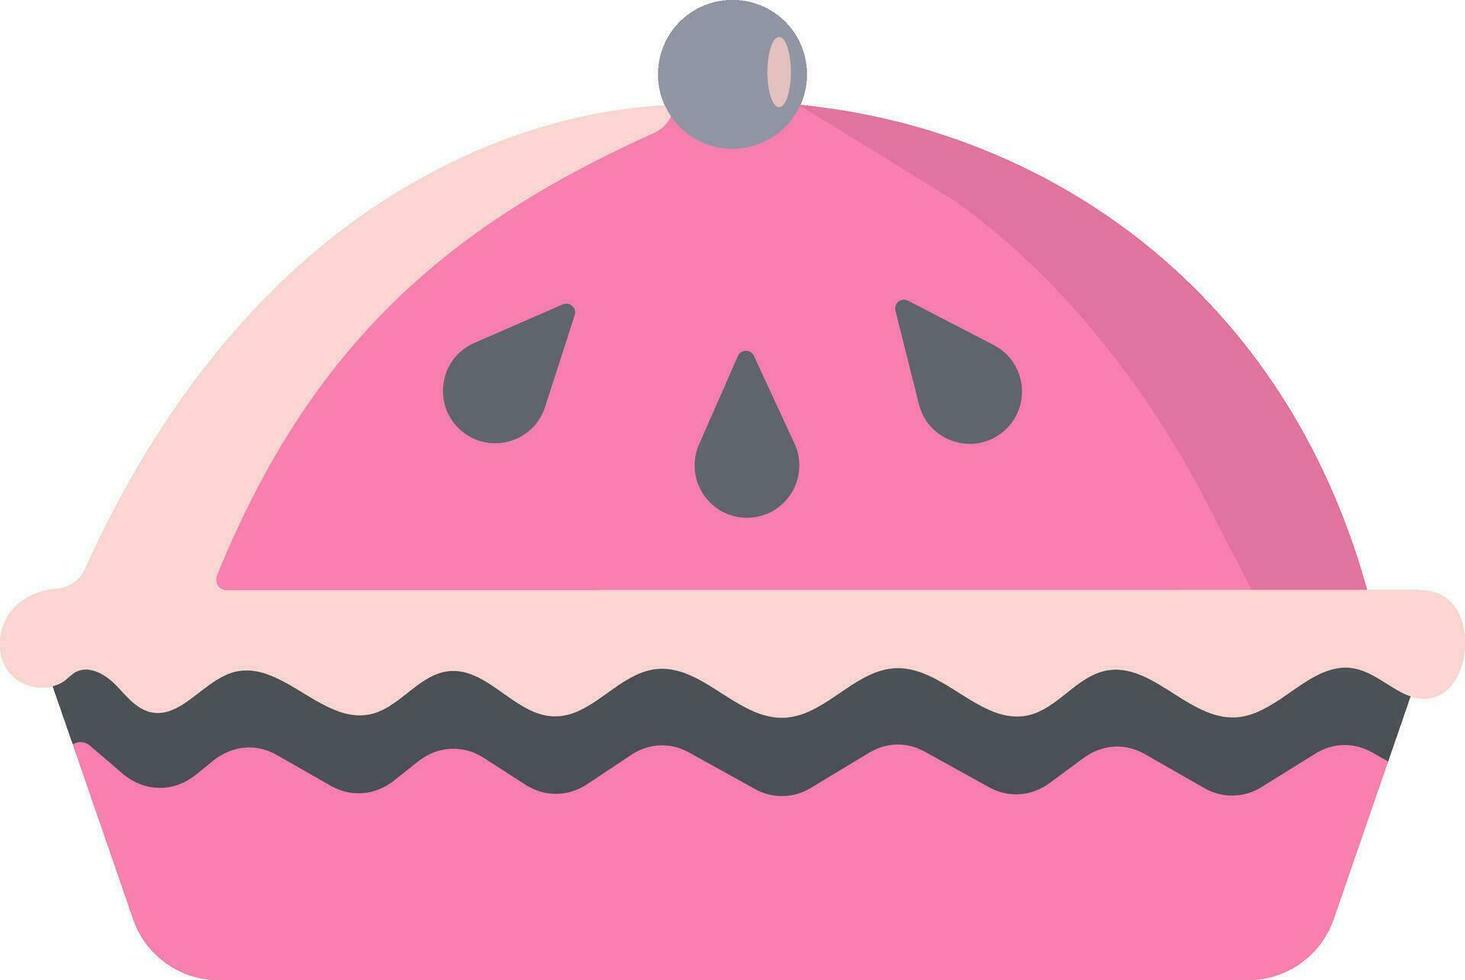 Pie dish icon in pink and gray color. vector